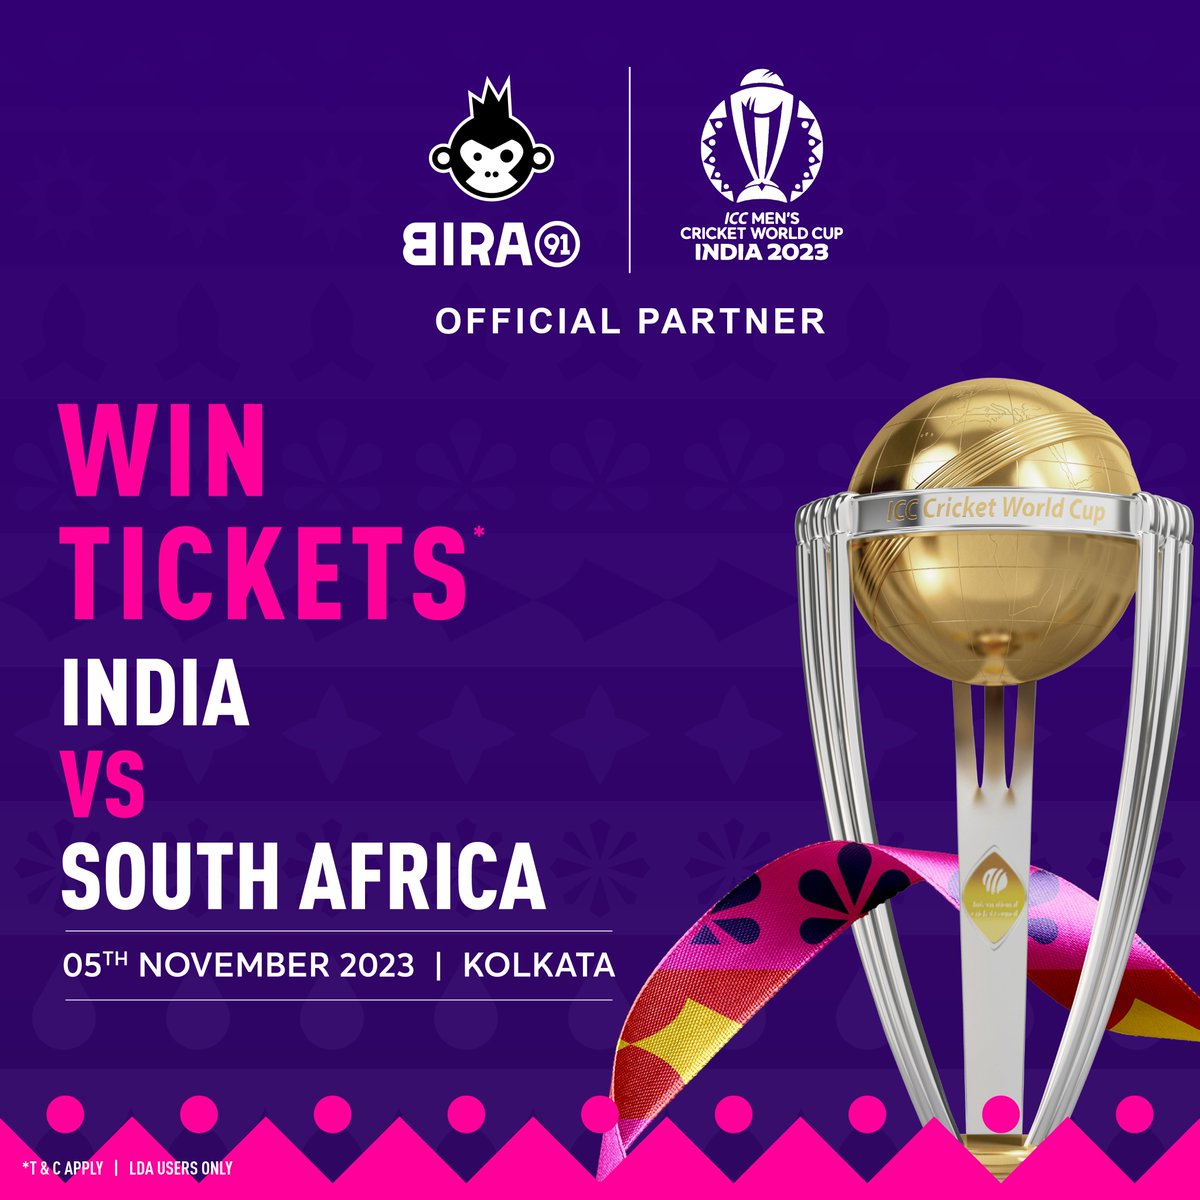 #GiveawayAlert Watch India vs South Africa live in Kolkata.🏏🔥 All you gotta do is: Tag your +1 for the match in the comments using the hashtag #Bira91xICC Follow @bira91 P.S. Tickets are available for pick up in Kolkata. HURRY! Winners will be announced tomorrow.